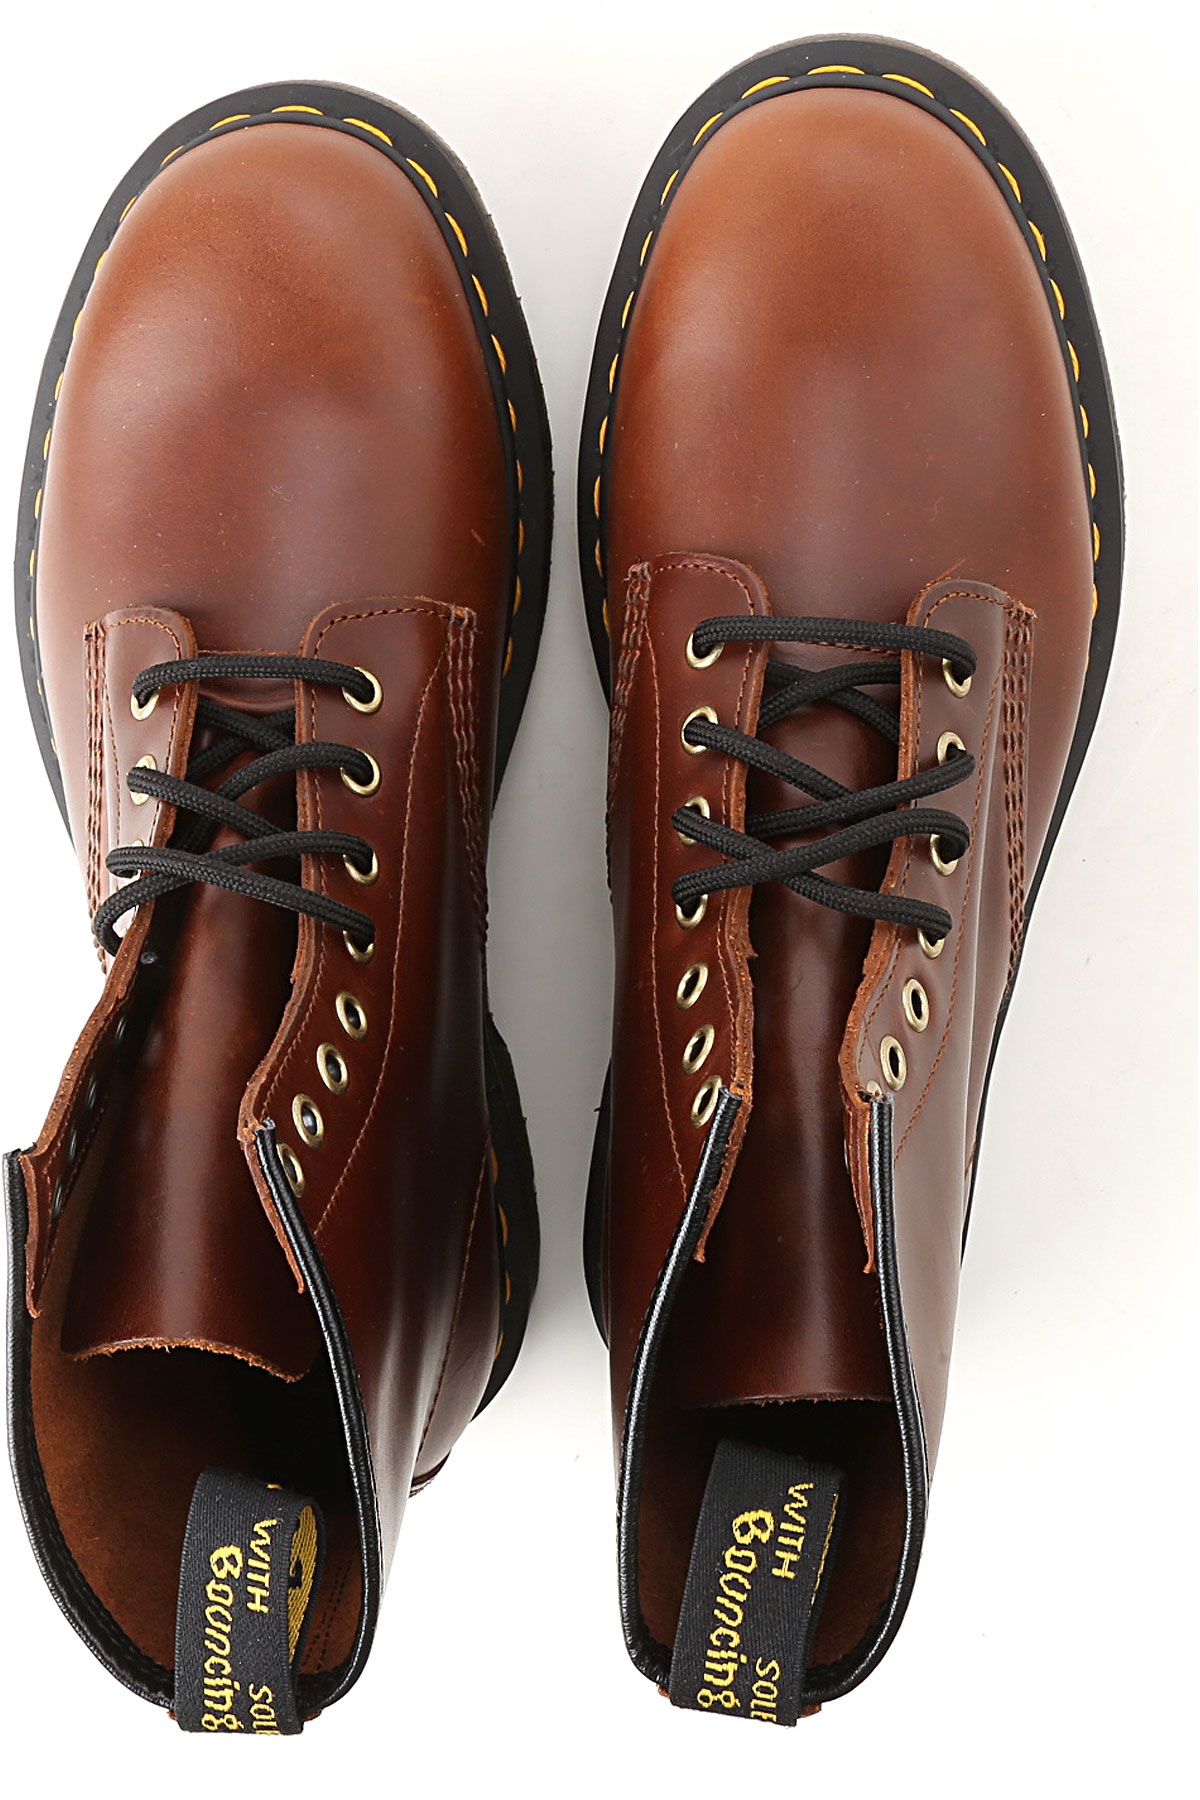 Mens Shoes Dr. Martens, Style code 